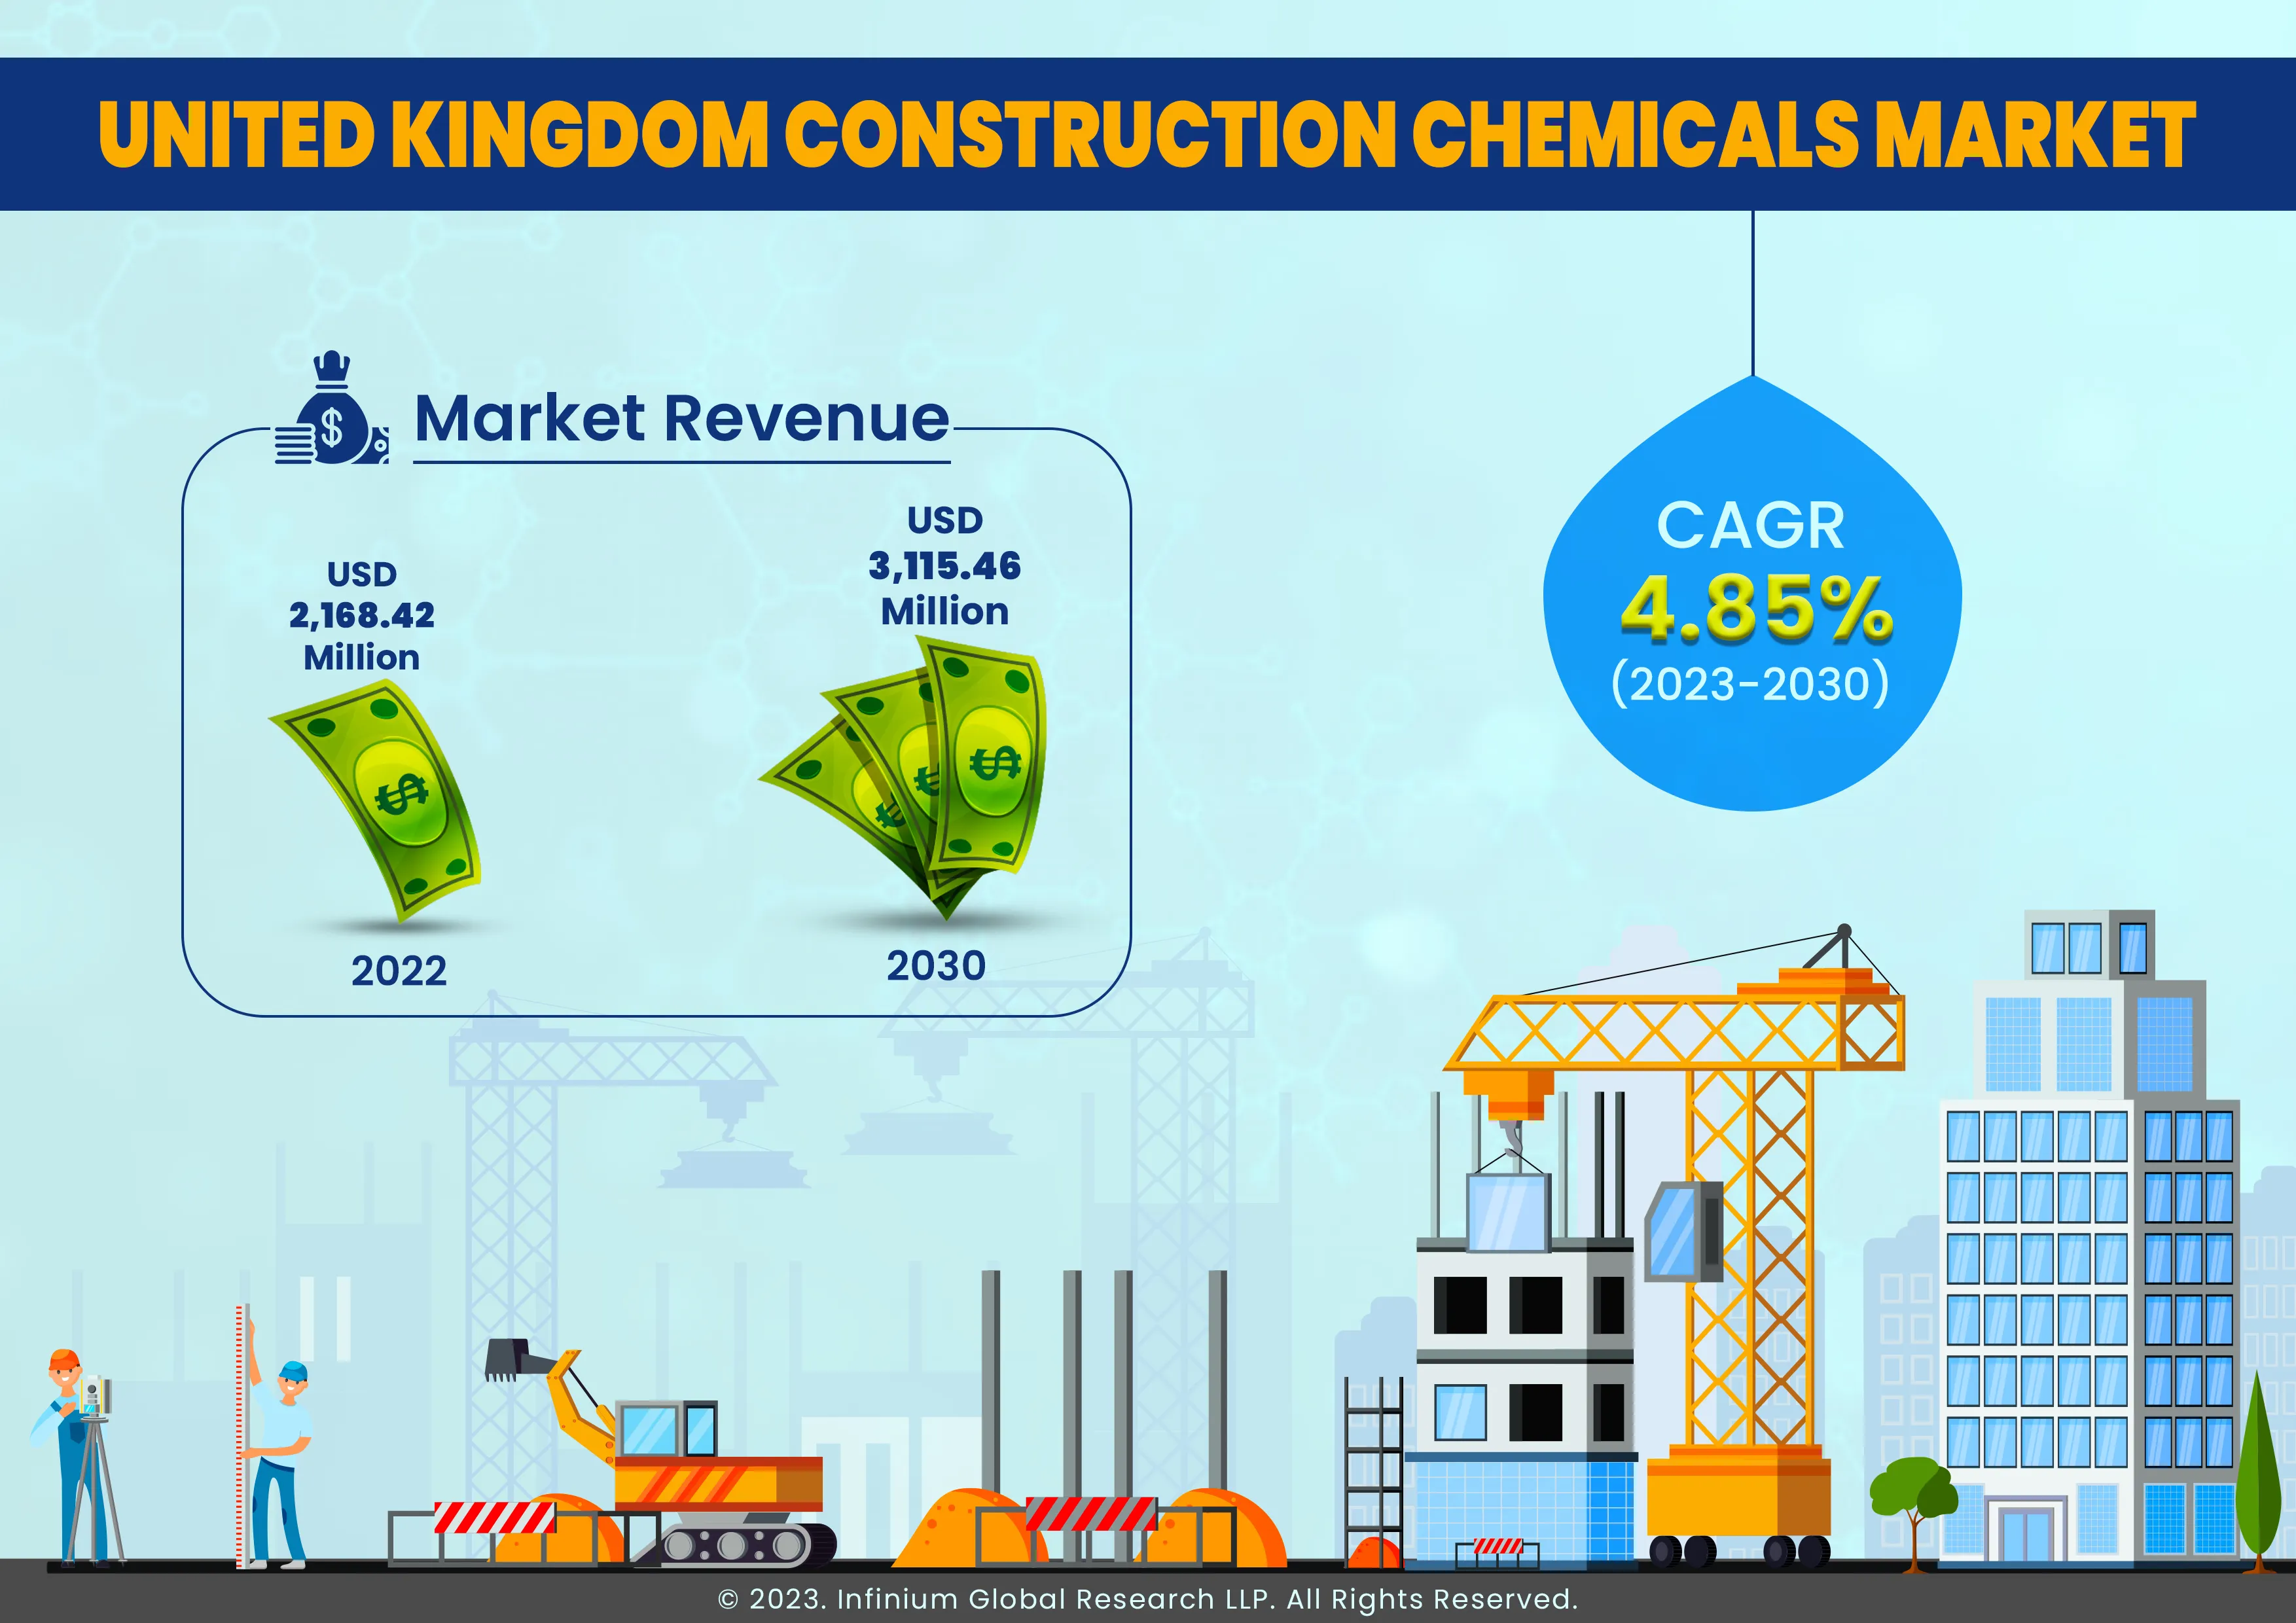 United Kingdom Construction Chemicals Market was Valued at USD 2,168.42 Million in 2022 and is Expected to Reach USD 3,115.46 Million by 2030 and Grow at a CAGR of 4.85% Over the Forecast Period.